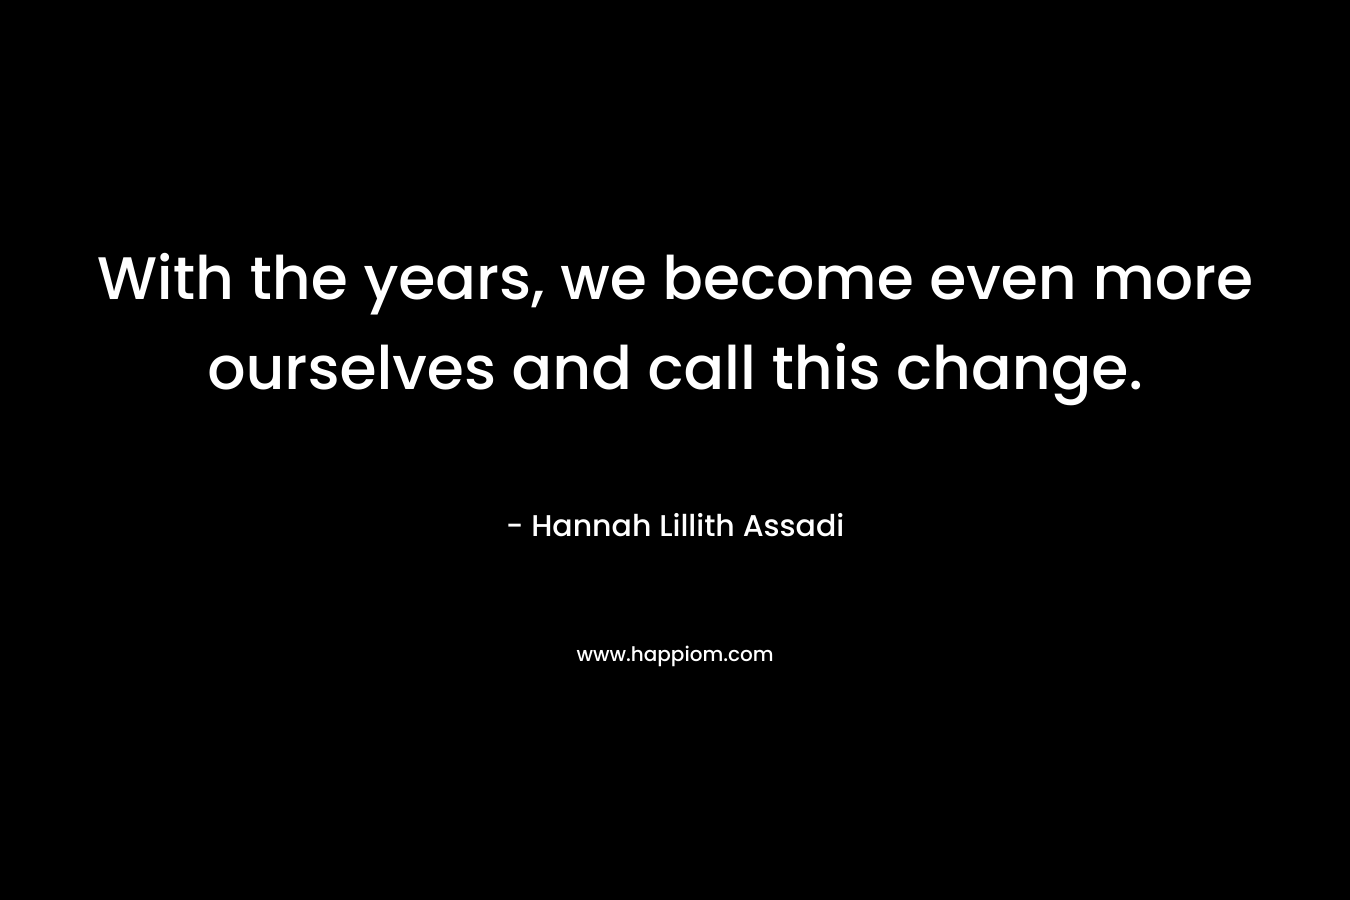 With the years, we become even more ourselves and call this change.